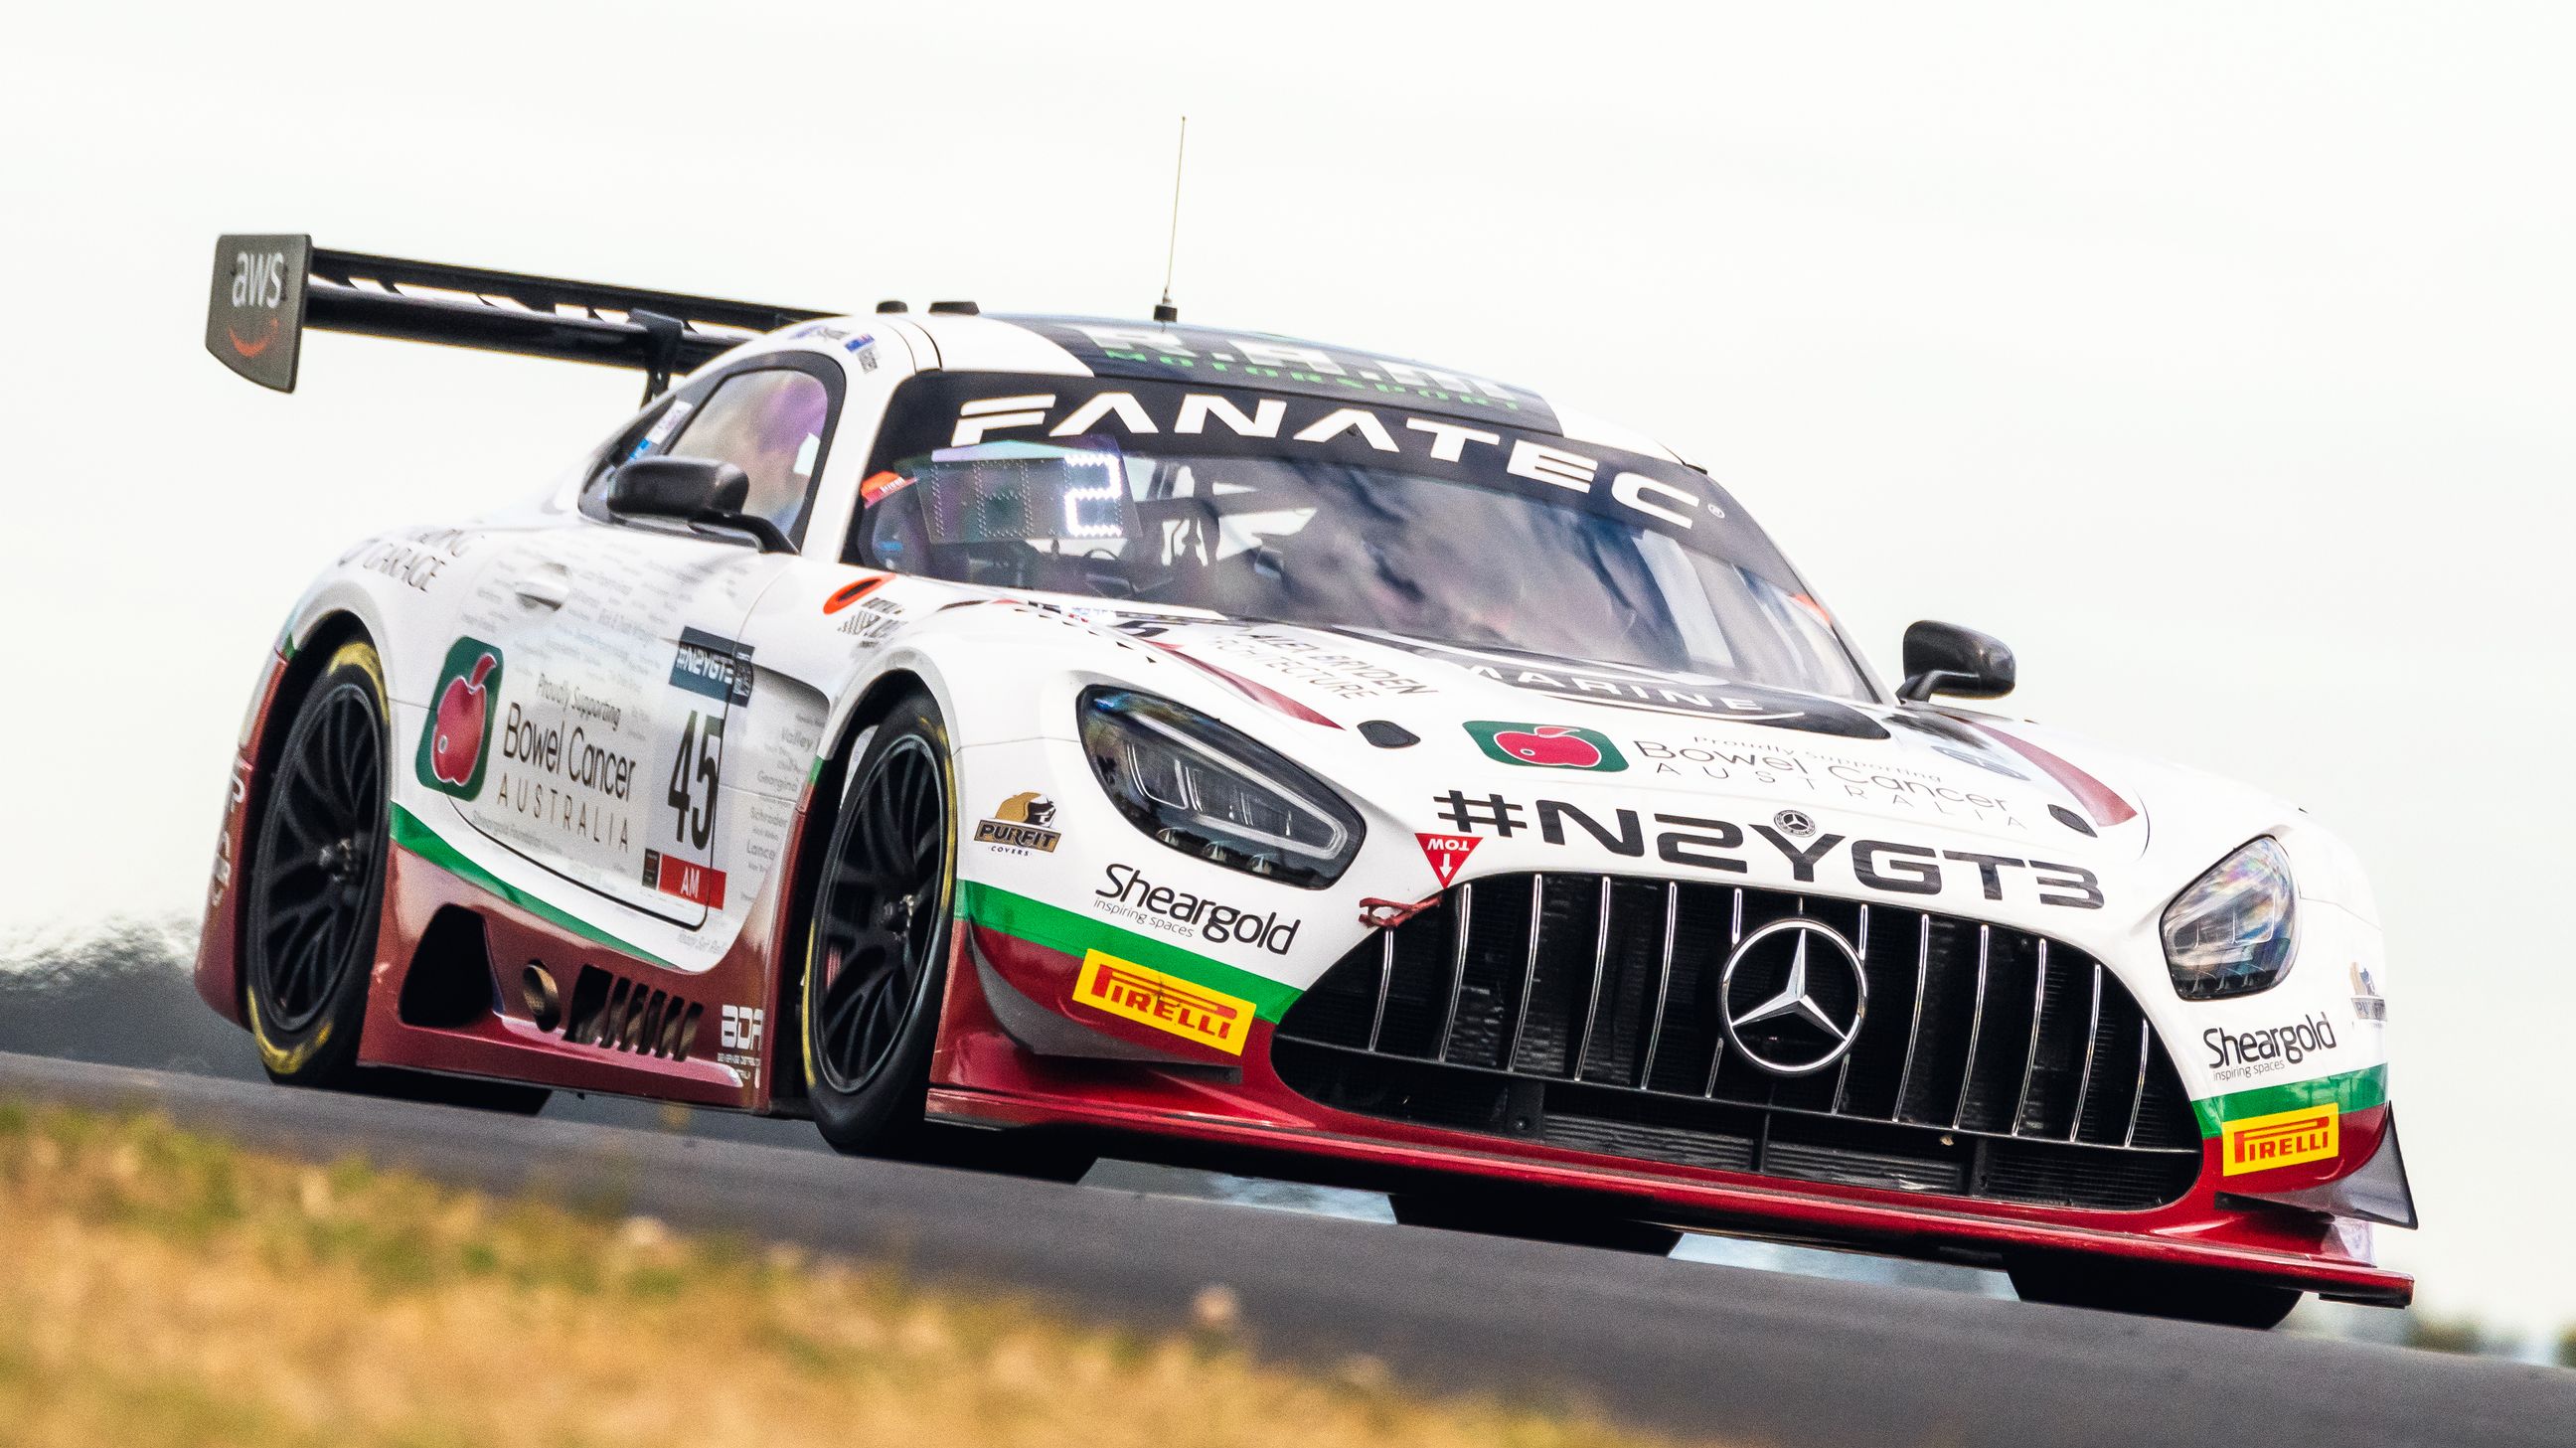 The Michael Sheargold-driven Mercedes-AMG GT3.